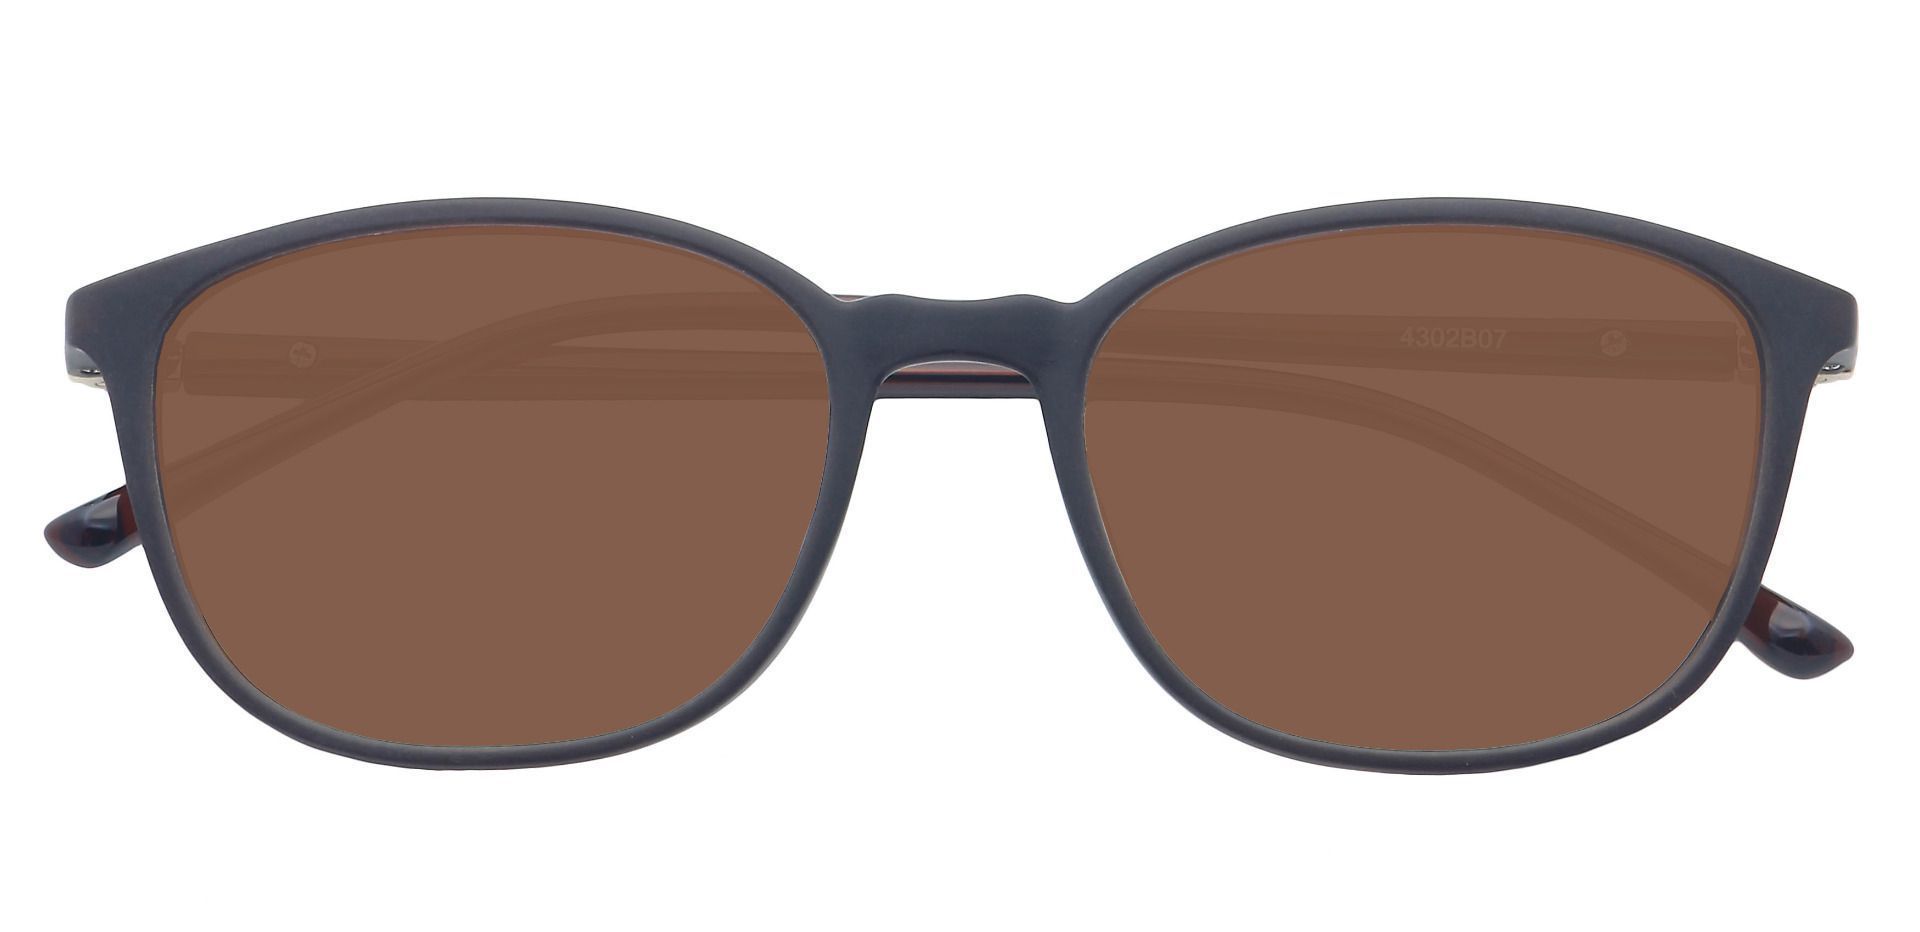 Karleen Oval Non-Rx Sunglasses - Brown Frame With Brown Lenses